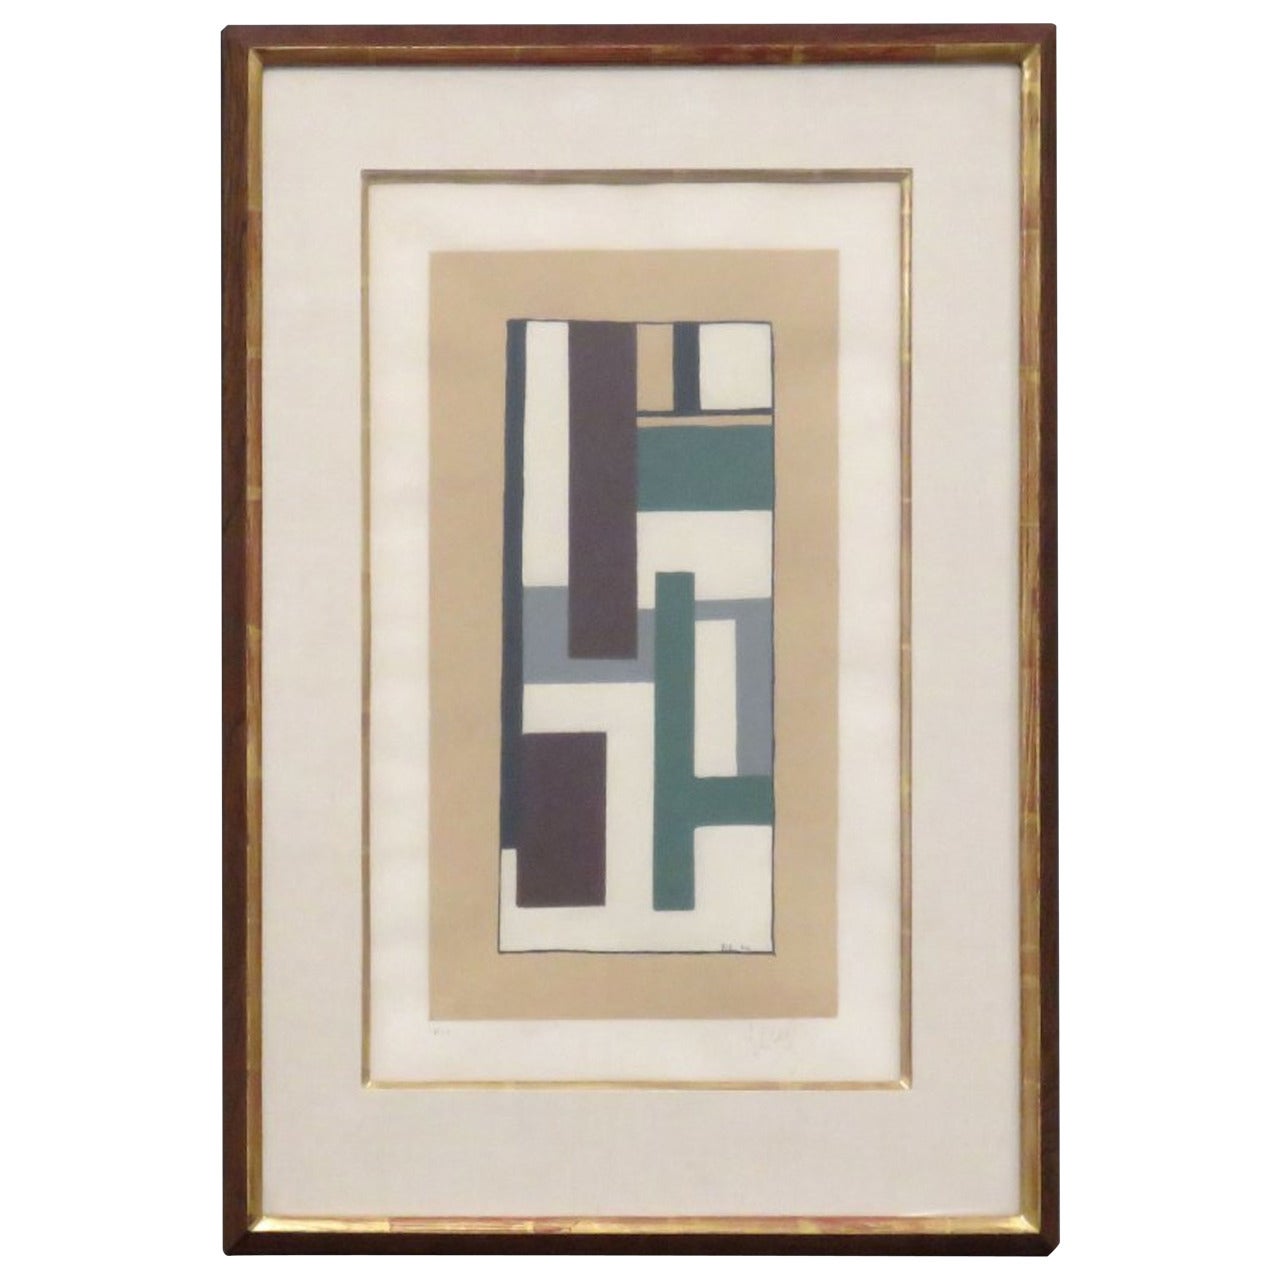 "Geometric Abstract" Framed Serigraph by Fernand Léger